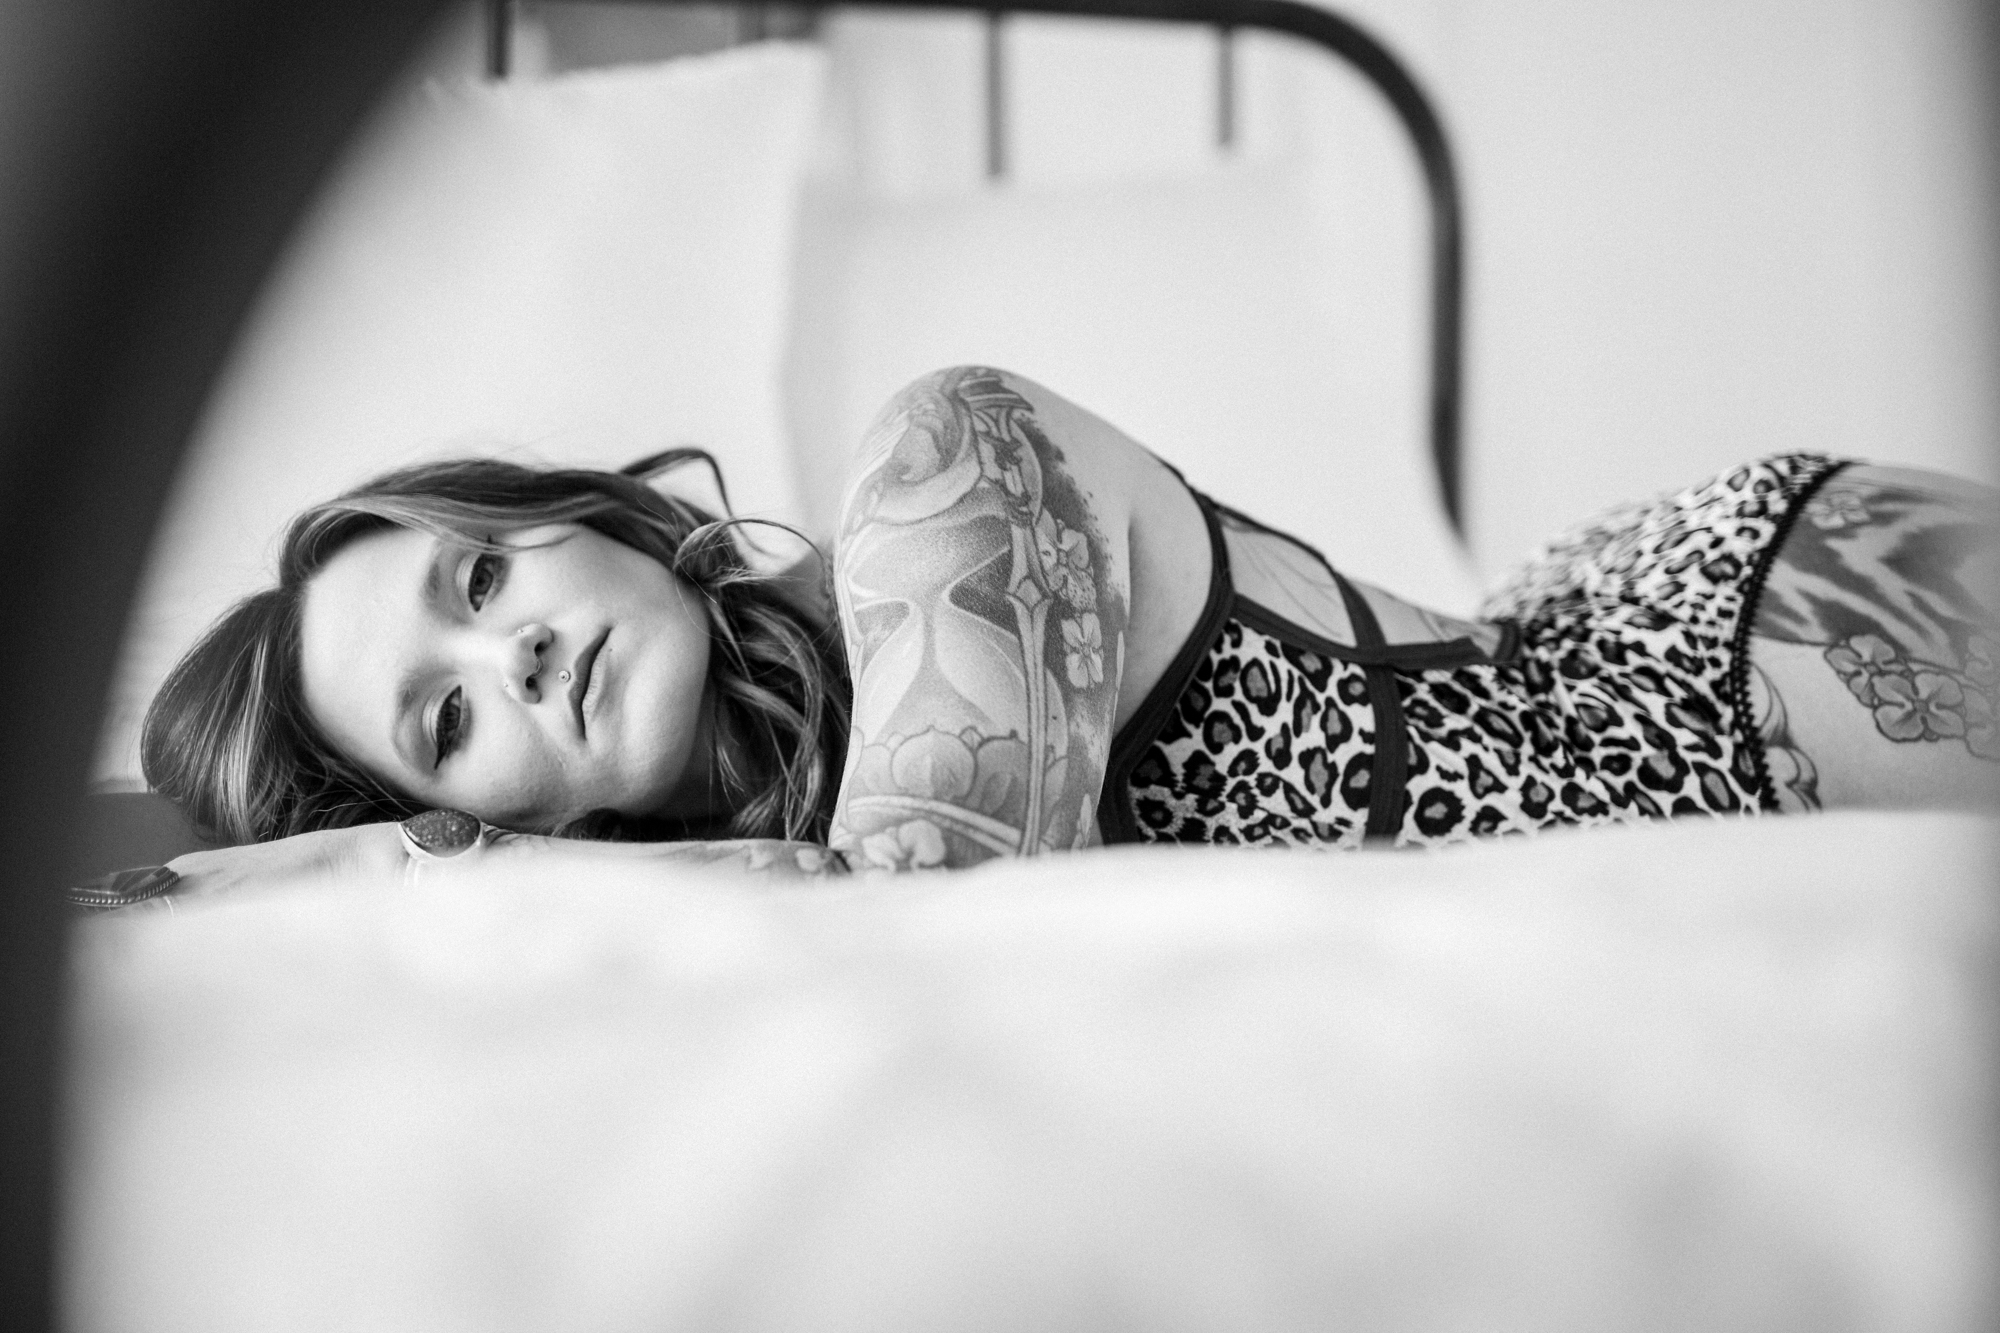 https://lilacandfernphotography.com/wp-content/uploads/2022/03/Boudoir-Fort-Collins-Colorado-Lilac-and-Fern-LS-17.jpg